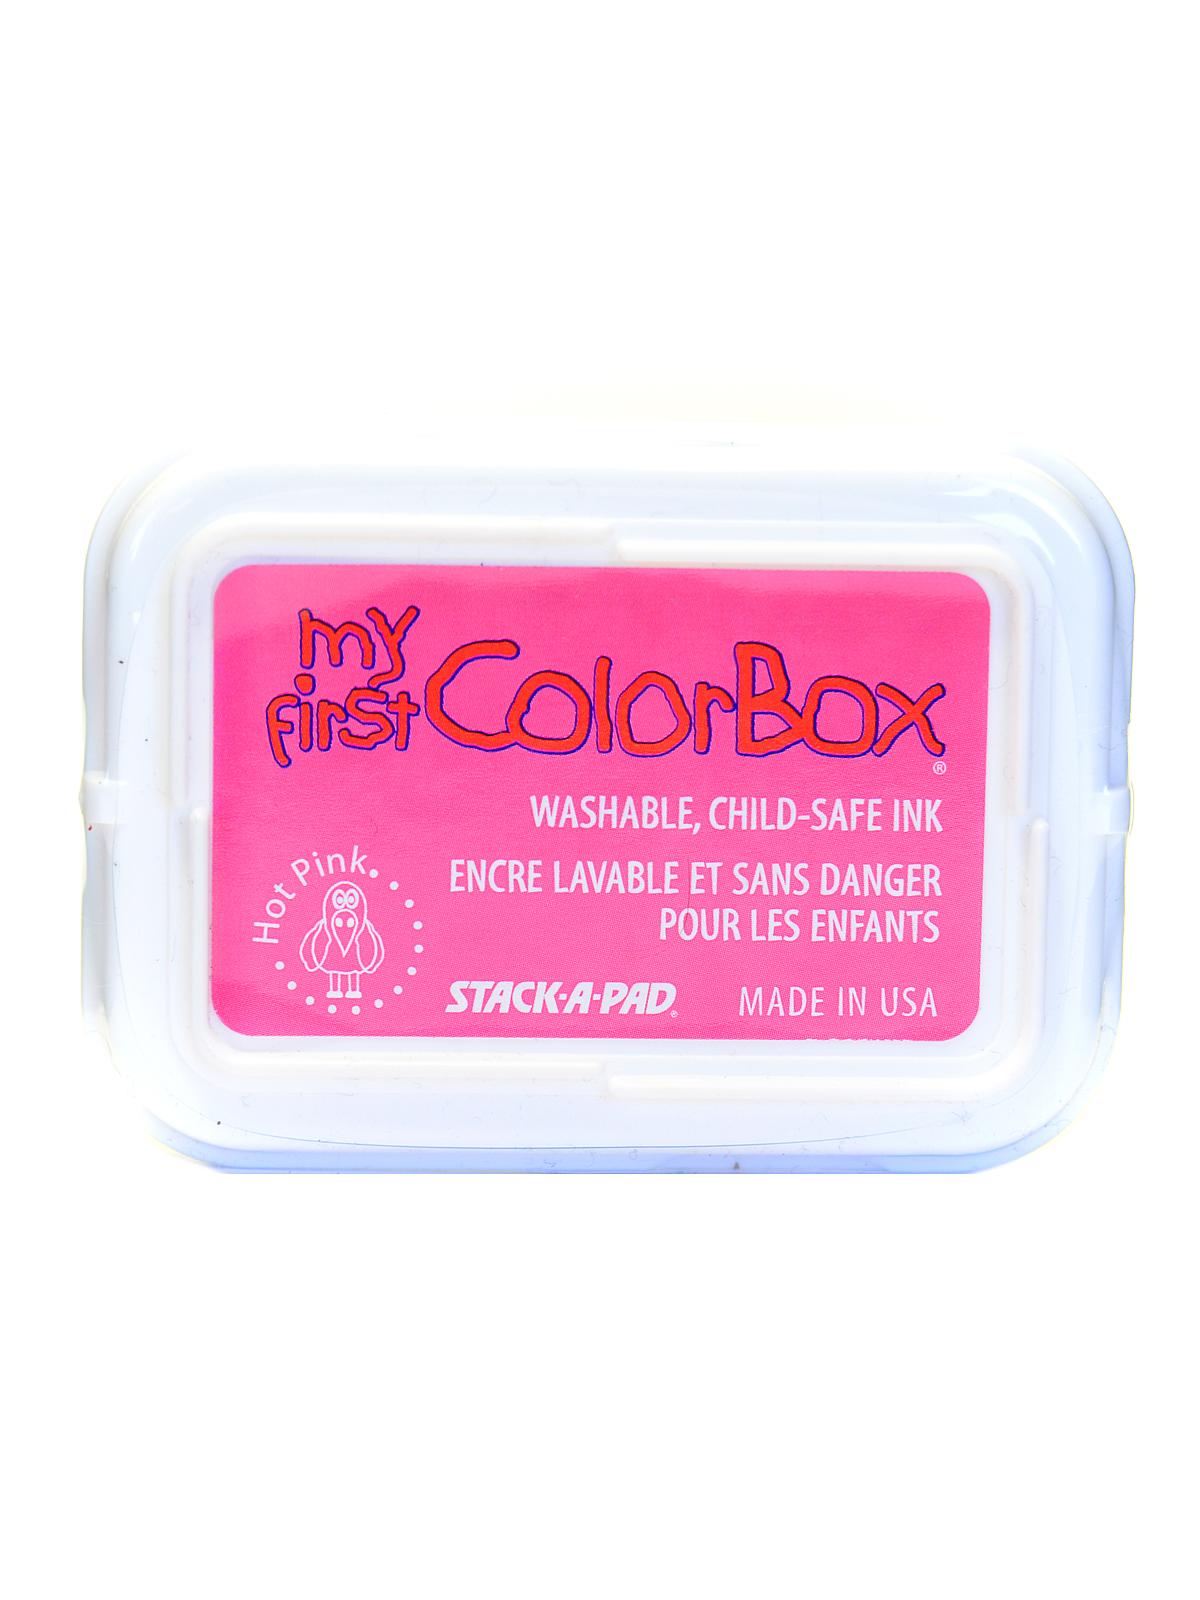 My First Colorbox Stamp Pads Hot Pink